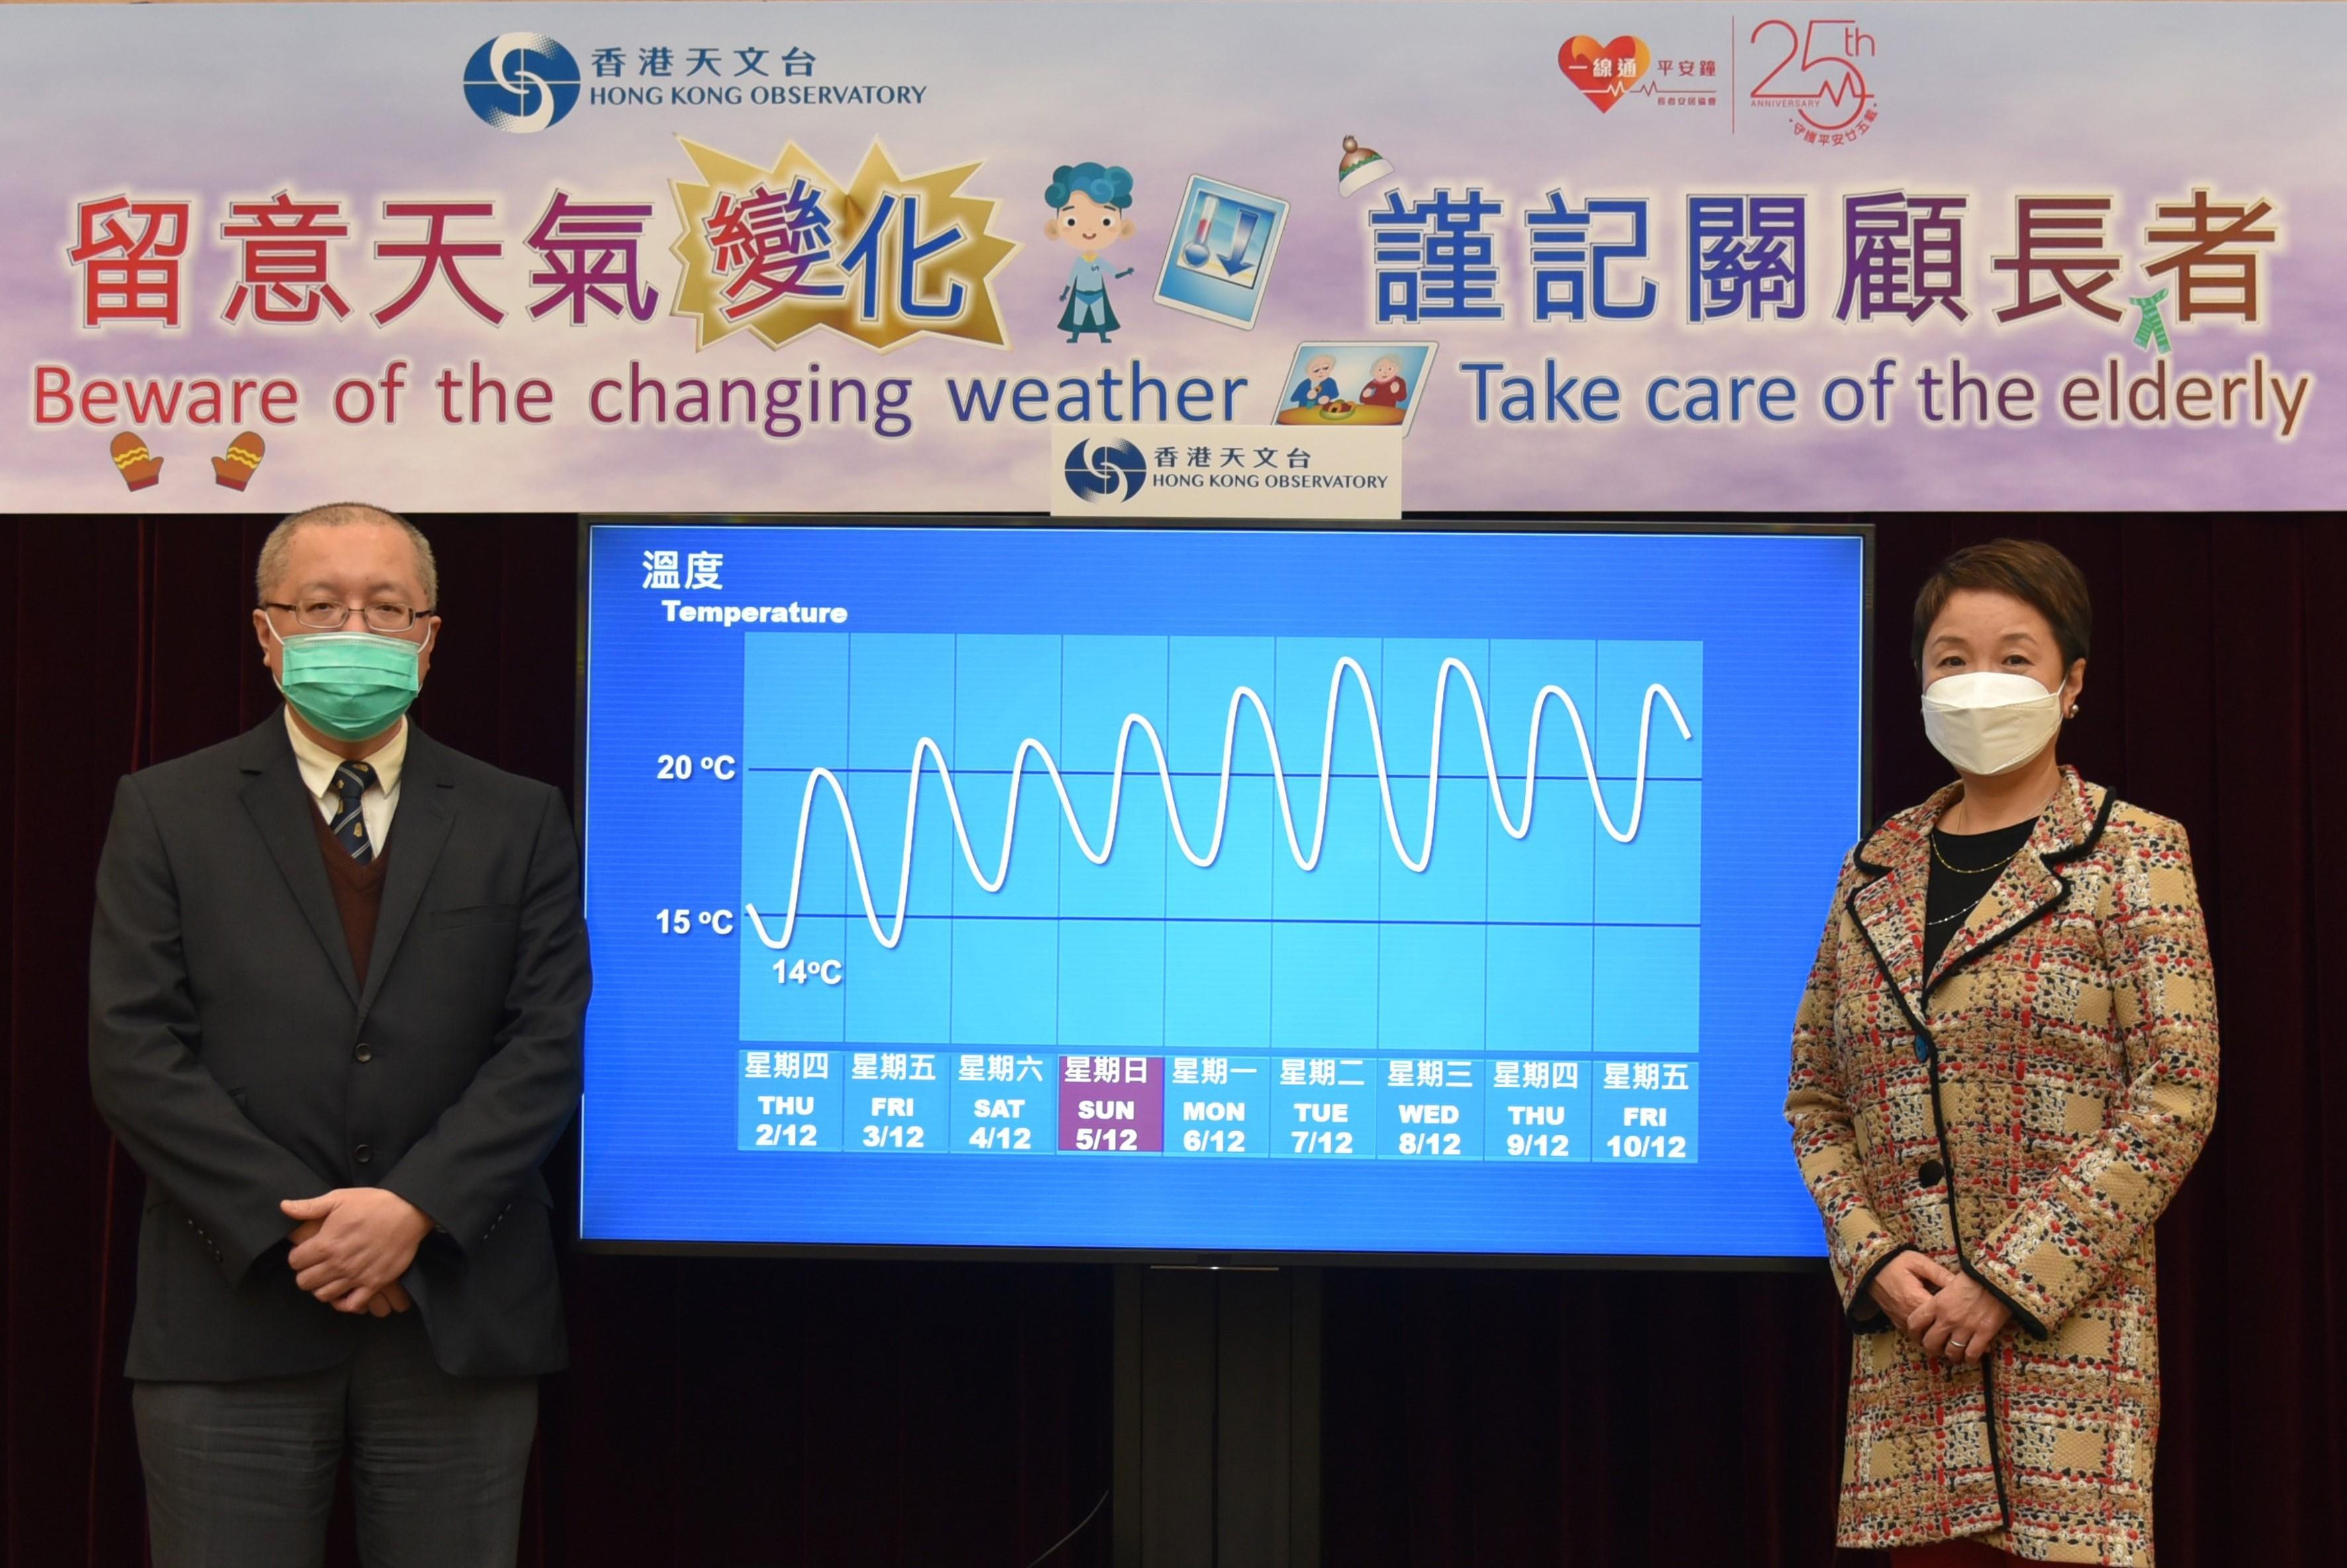 The Assistant Director of the Hong Kong Observatory, Mr Chan Pak-wai (left), and the Chief Executive Officer of the Senior Citizen Home Safety Association, Ms Maura Wong (right), hold a joint press conference today (December 1), to remind the public, particularly the elderly and persons with chronic medical conditions, to pay attention to weather and temperature changes, and take appropriate precautions, as well as to get prepared for the winter season.